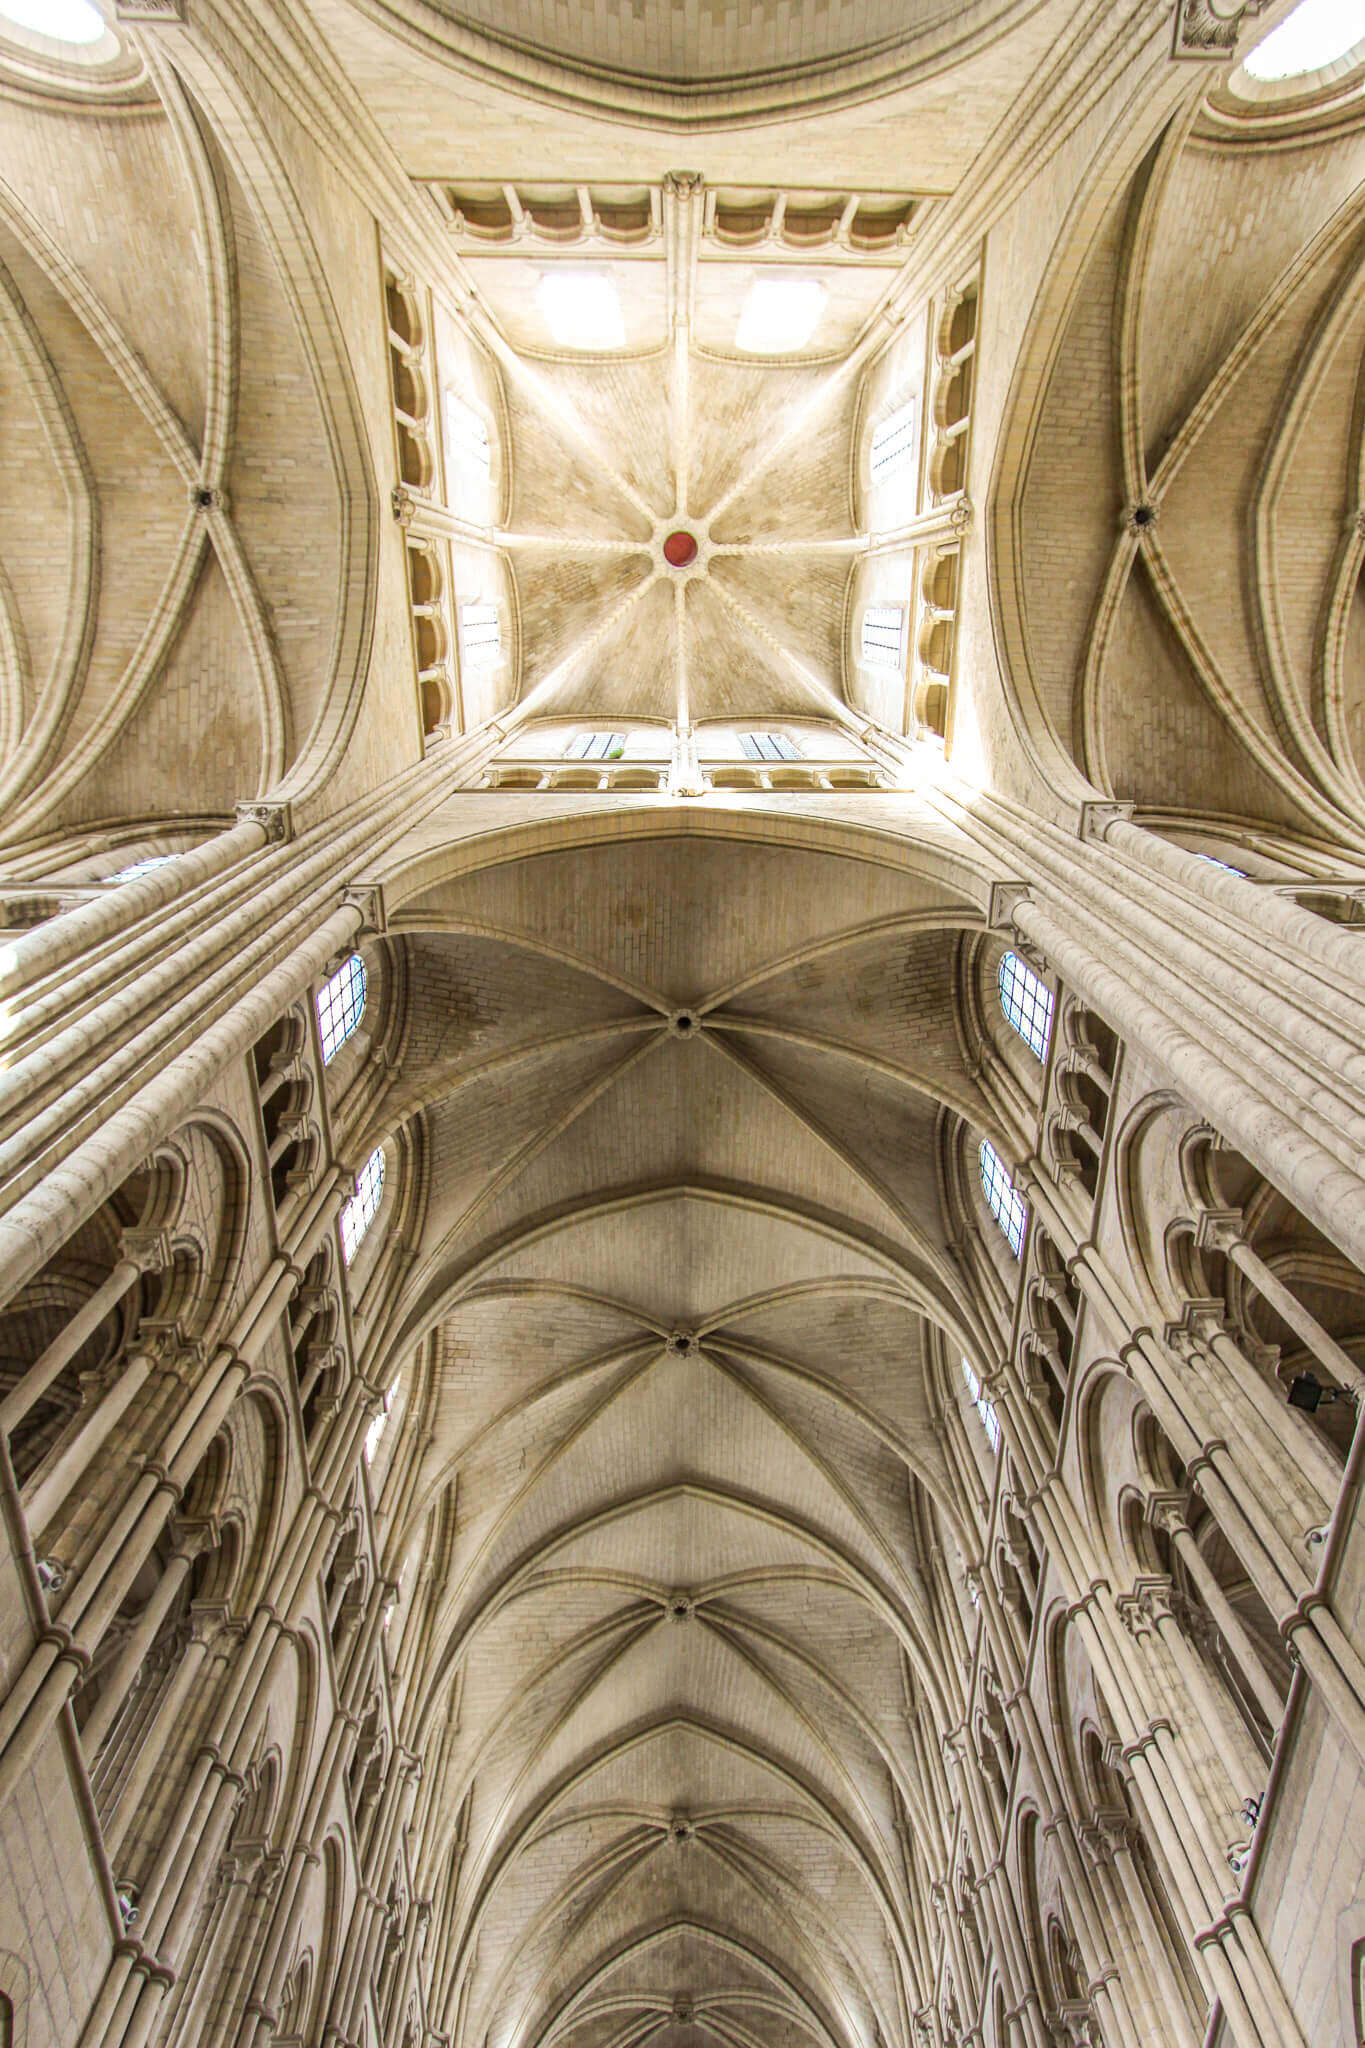 Gothic vaulting in the Laon Cathedral